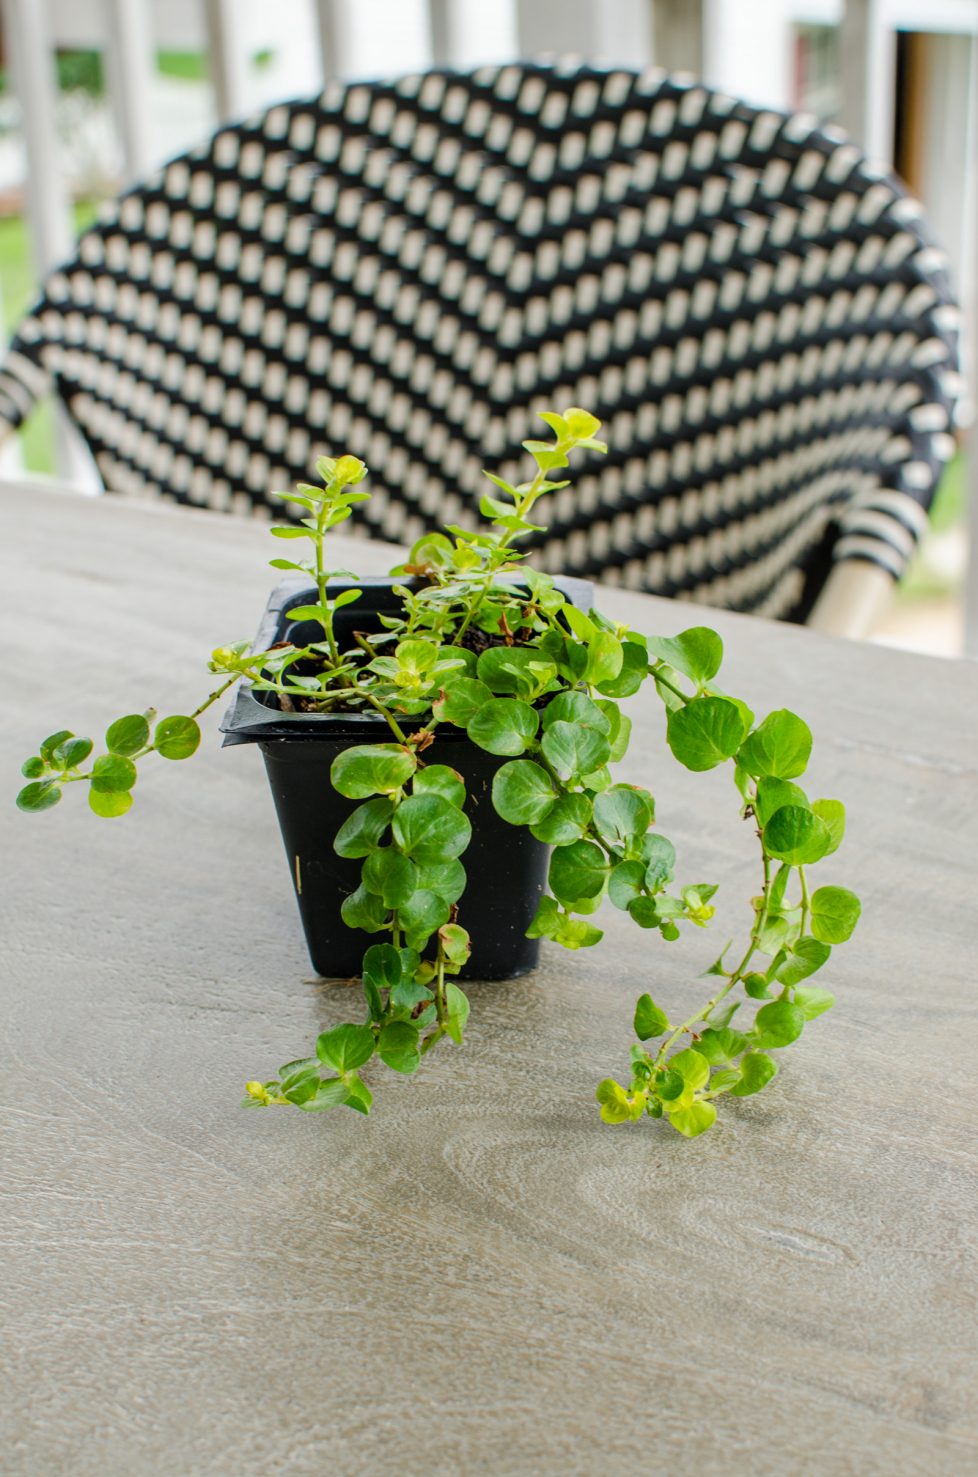 A shot of a transplant of creeping jenny vine in a black container.